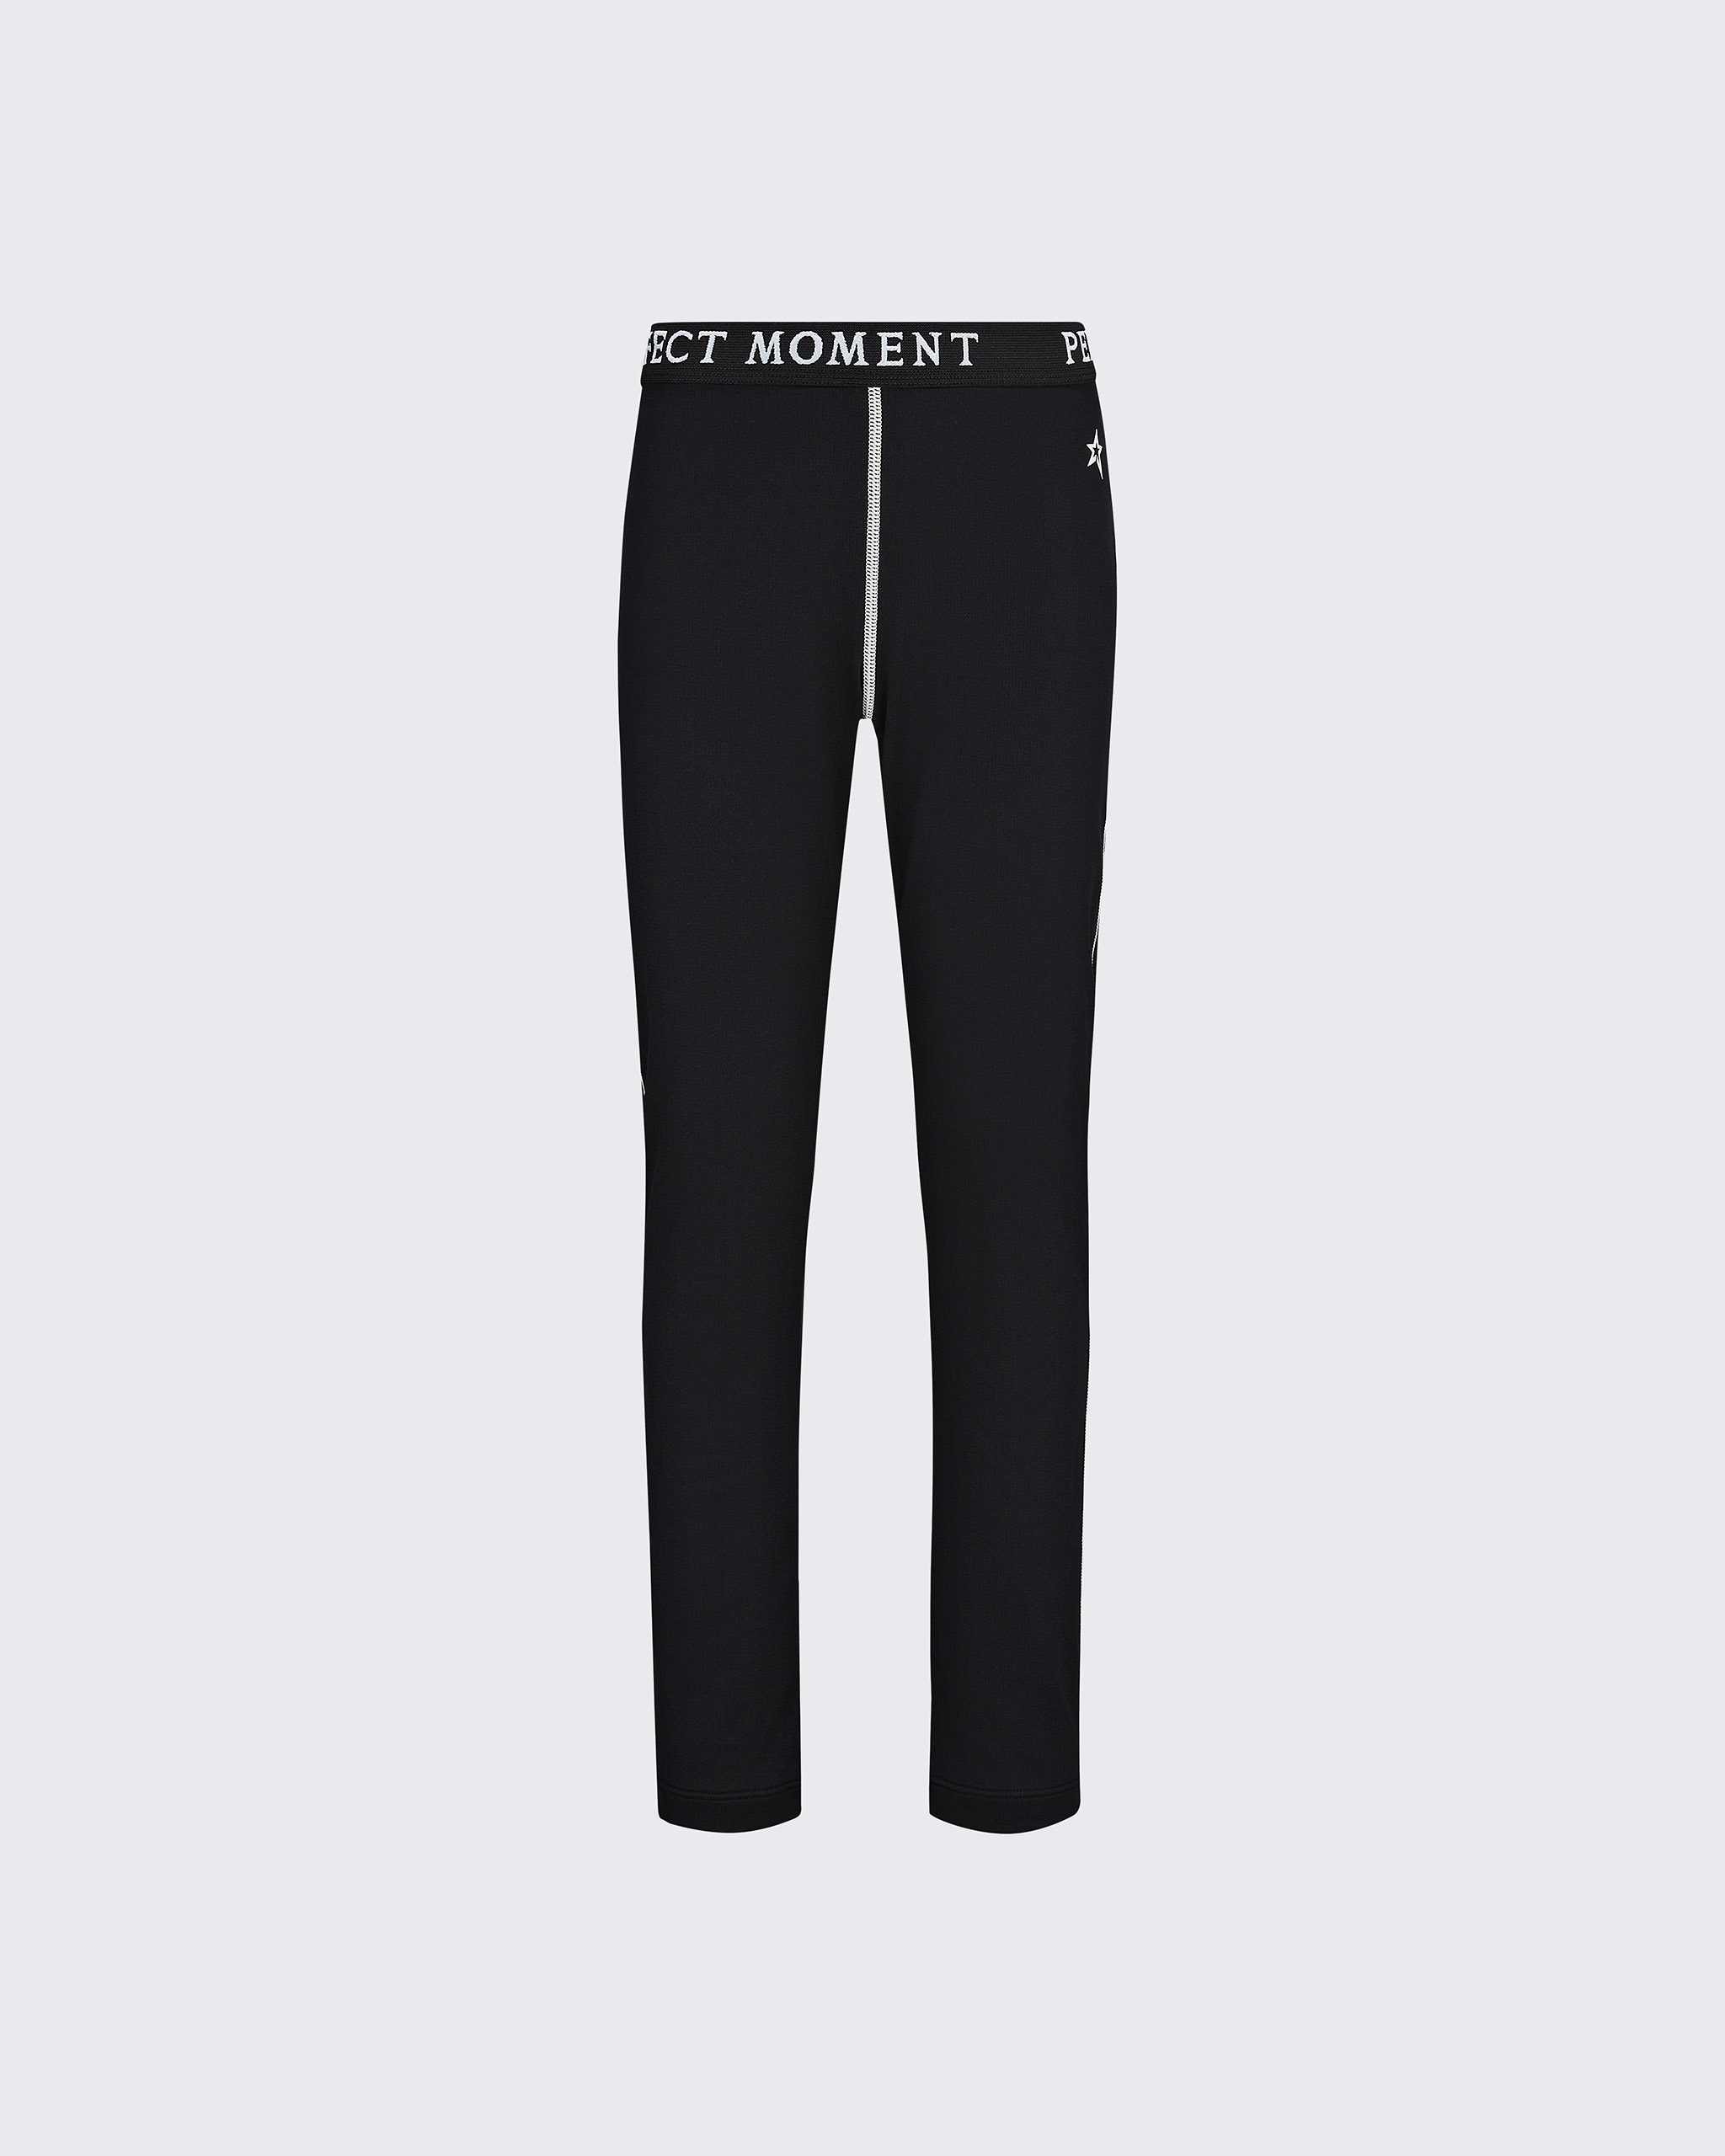 Perfect Moment Thermal Pant Y14 In Black